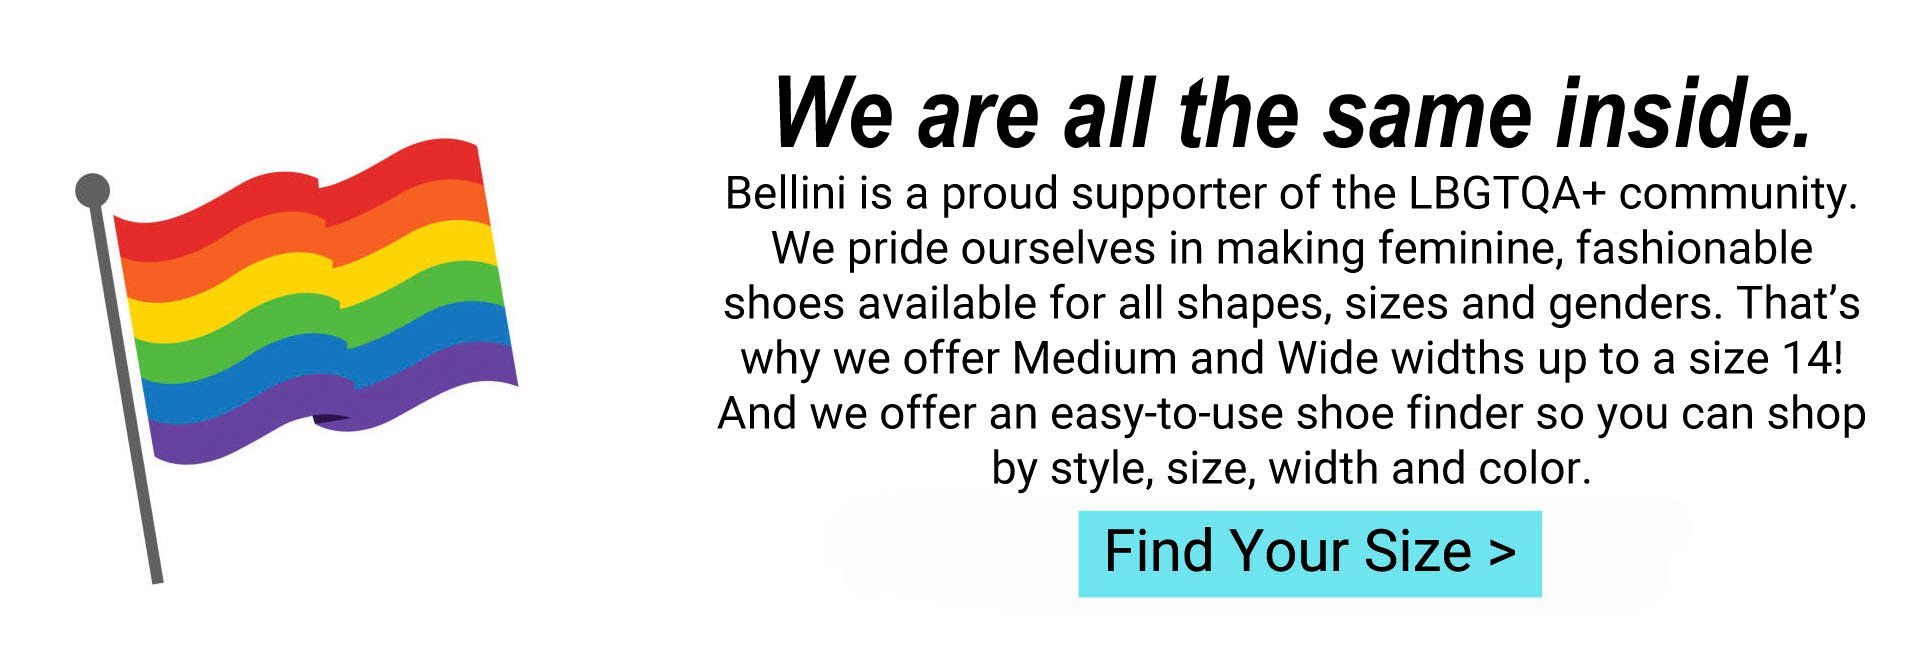 Find Your Size